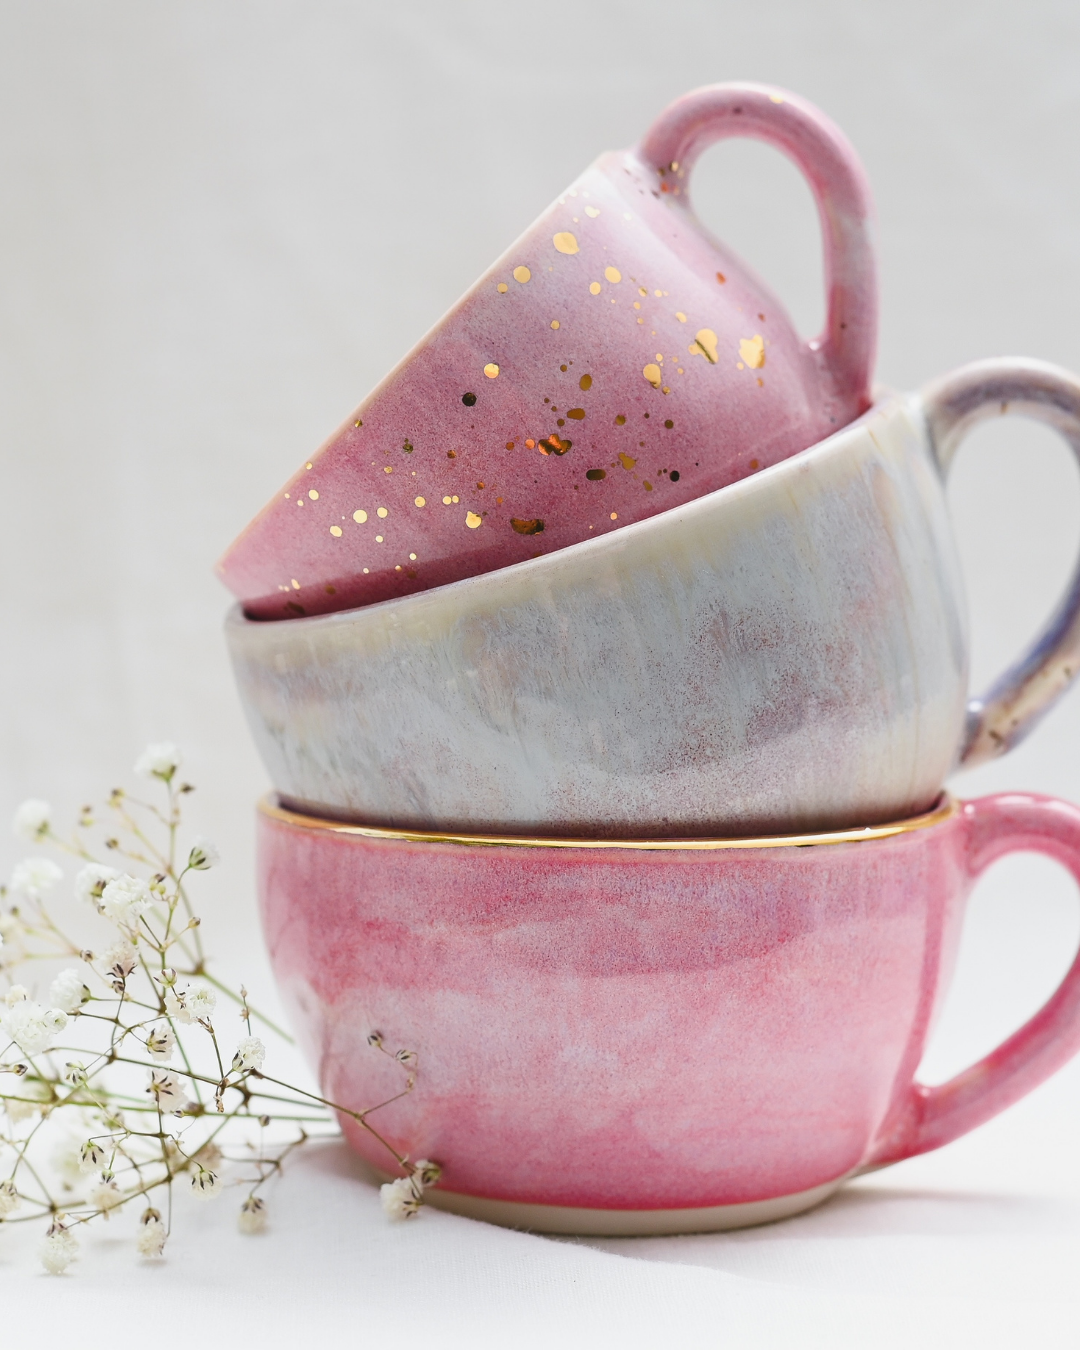 Pink & Gold Cappuccino Cup